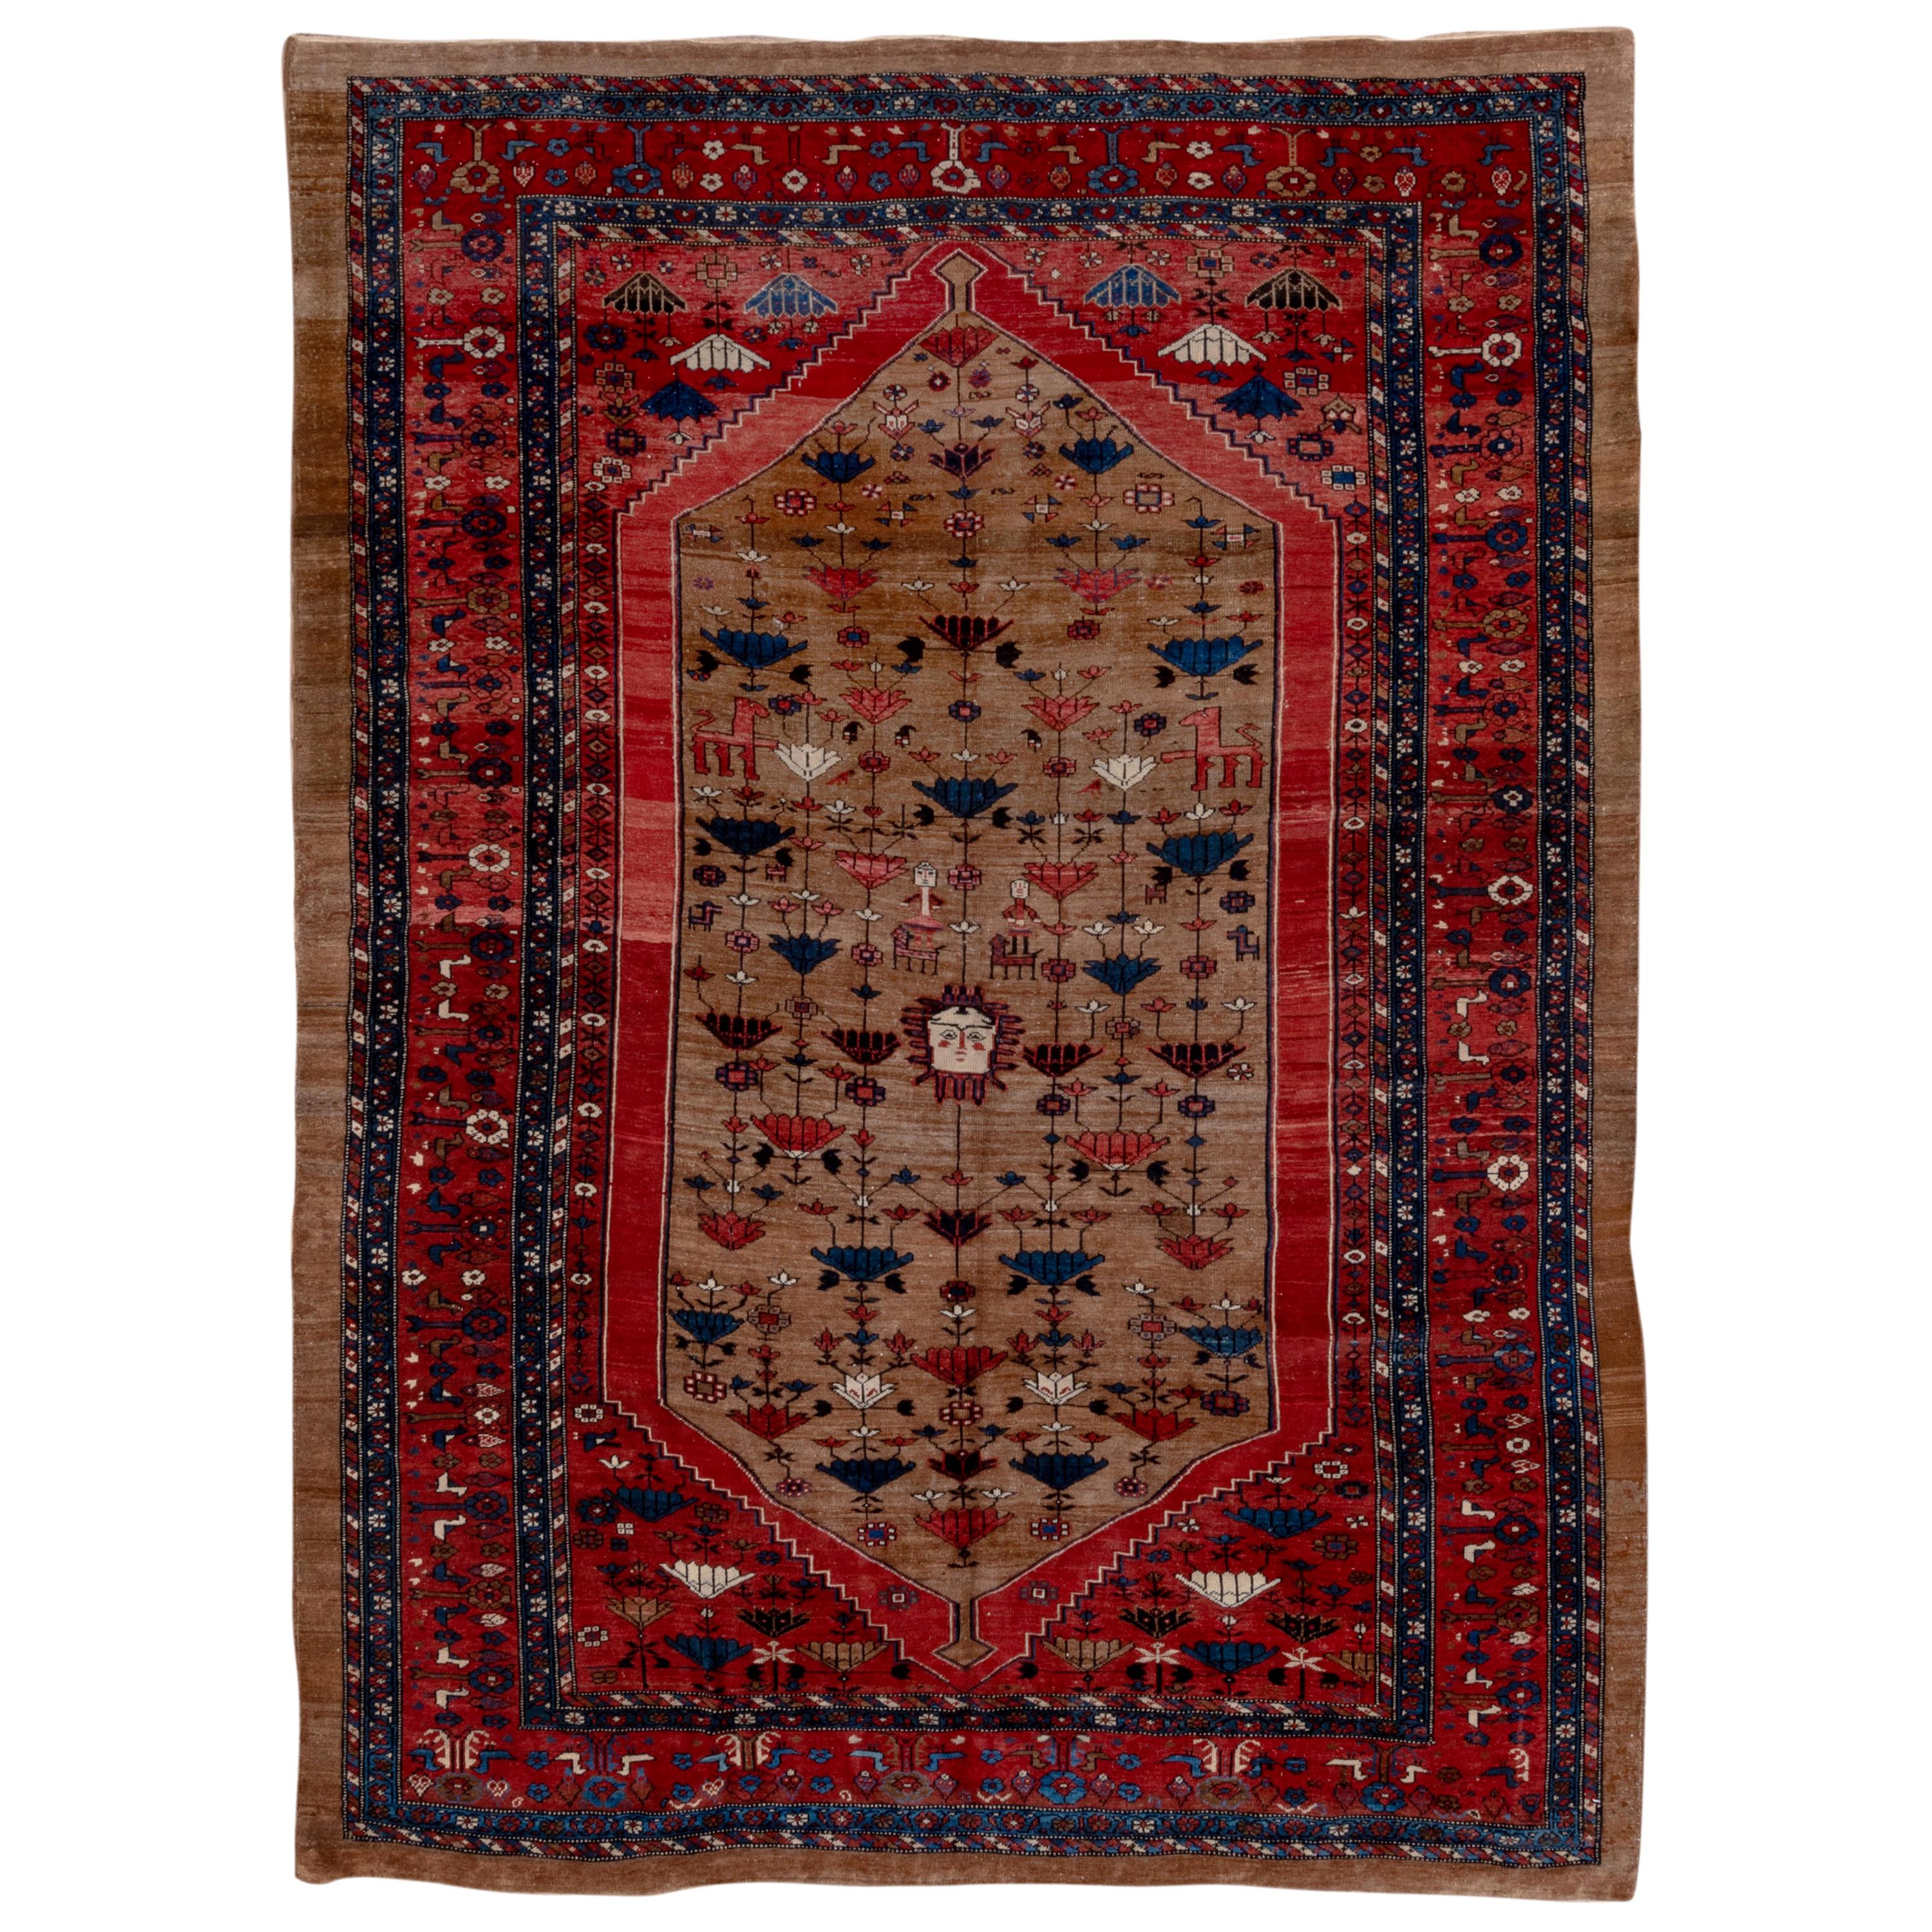 Rare Antique Heriz Bakhshayesh Carpet, Brown and Rich Red Field, B